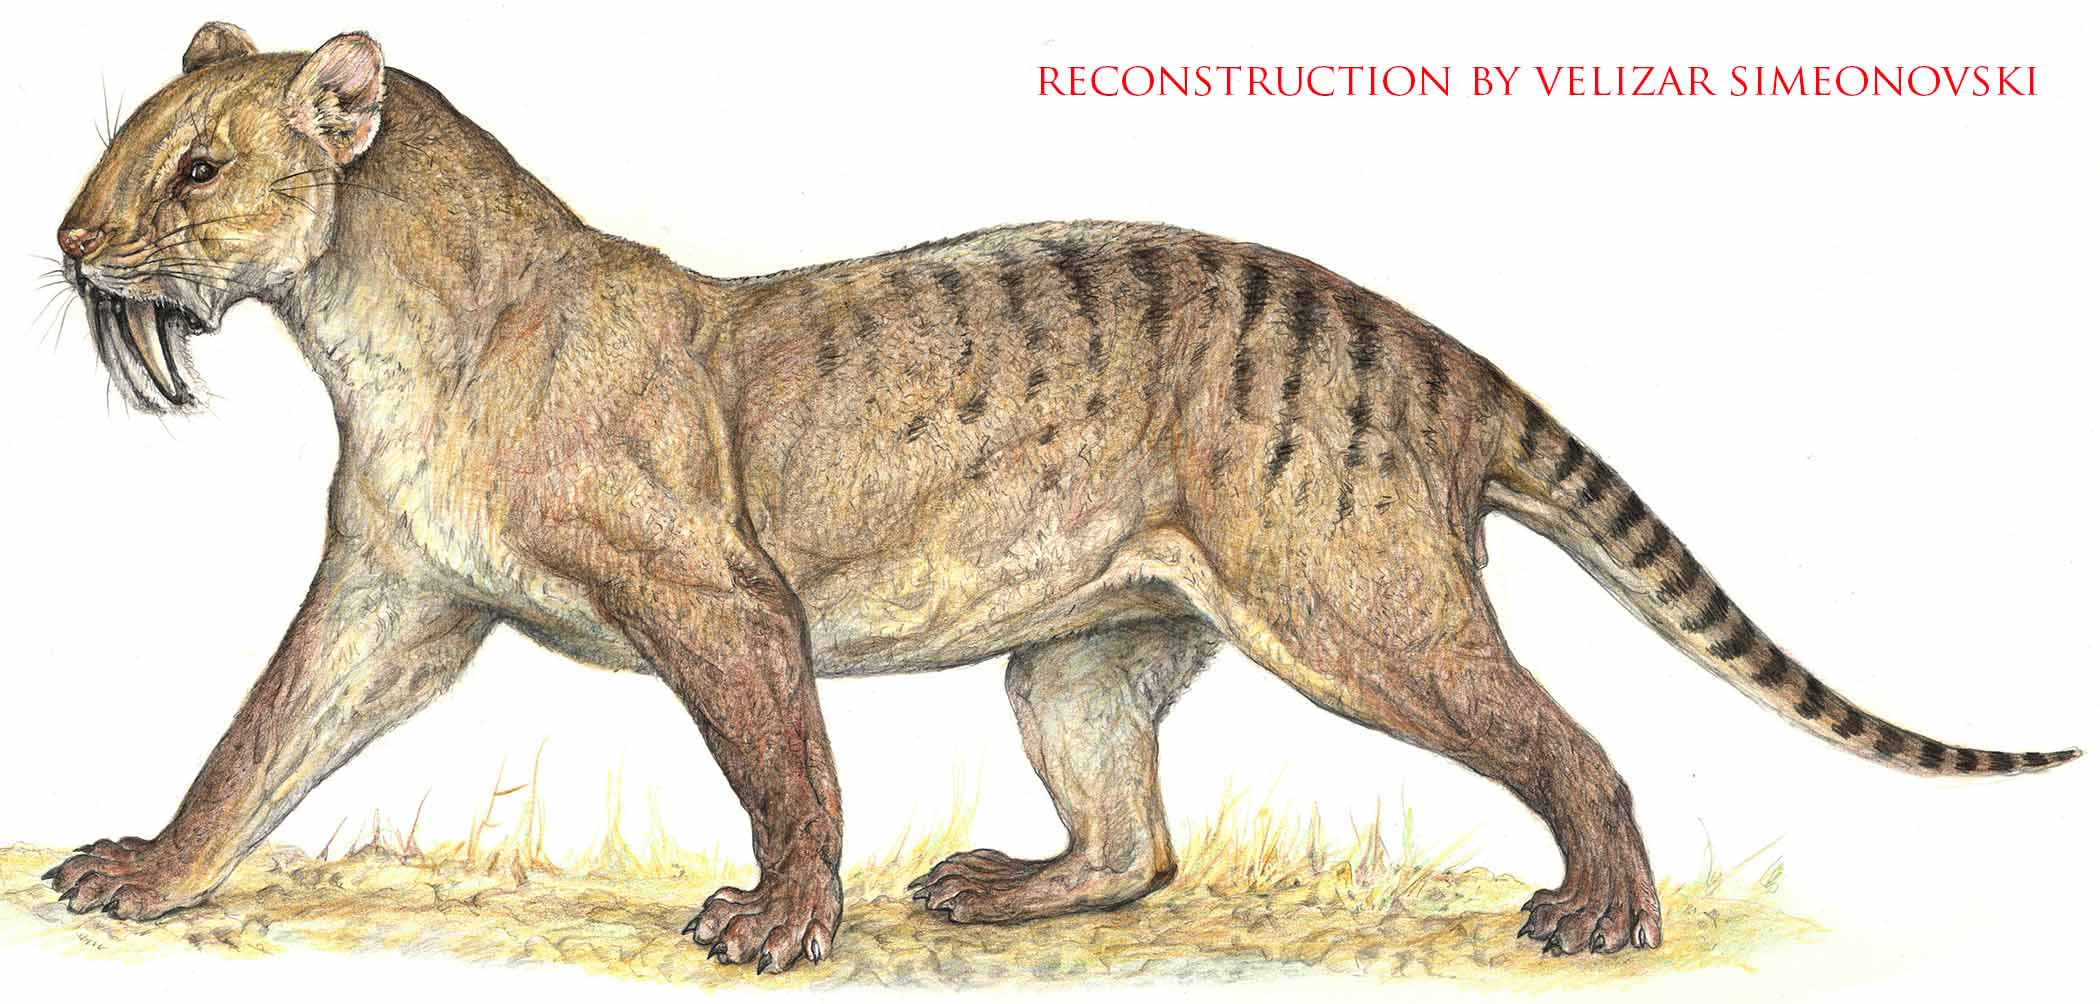 Drawing of an animal that looks like a large cat with small ears and long, sharp teeth